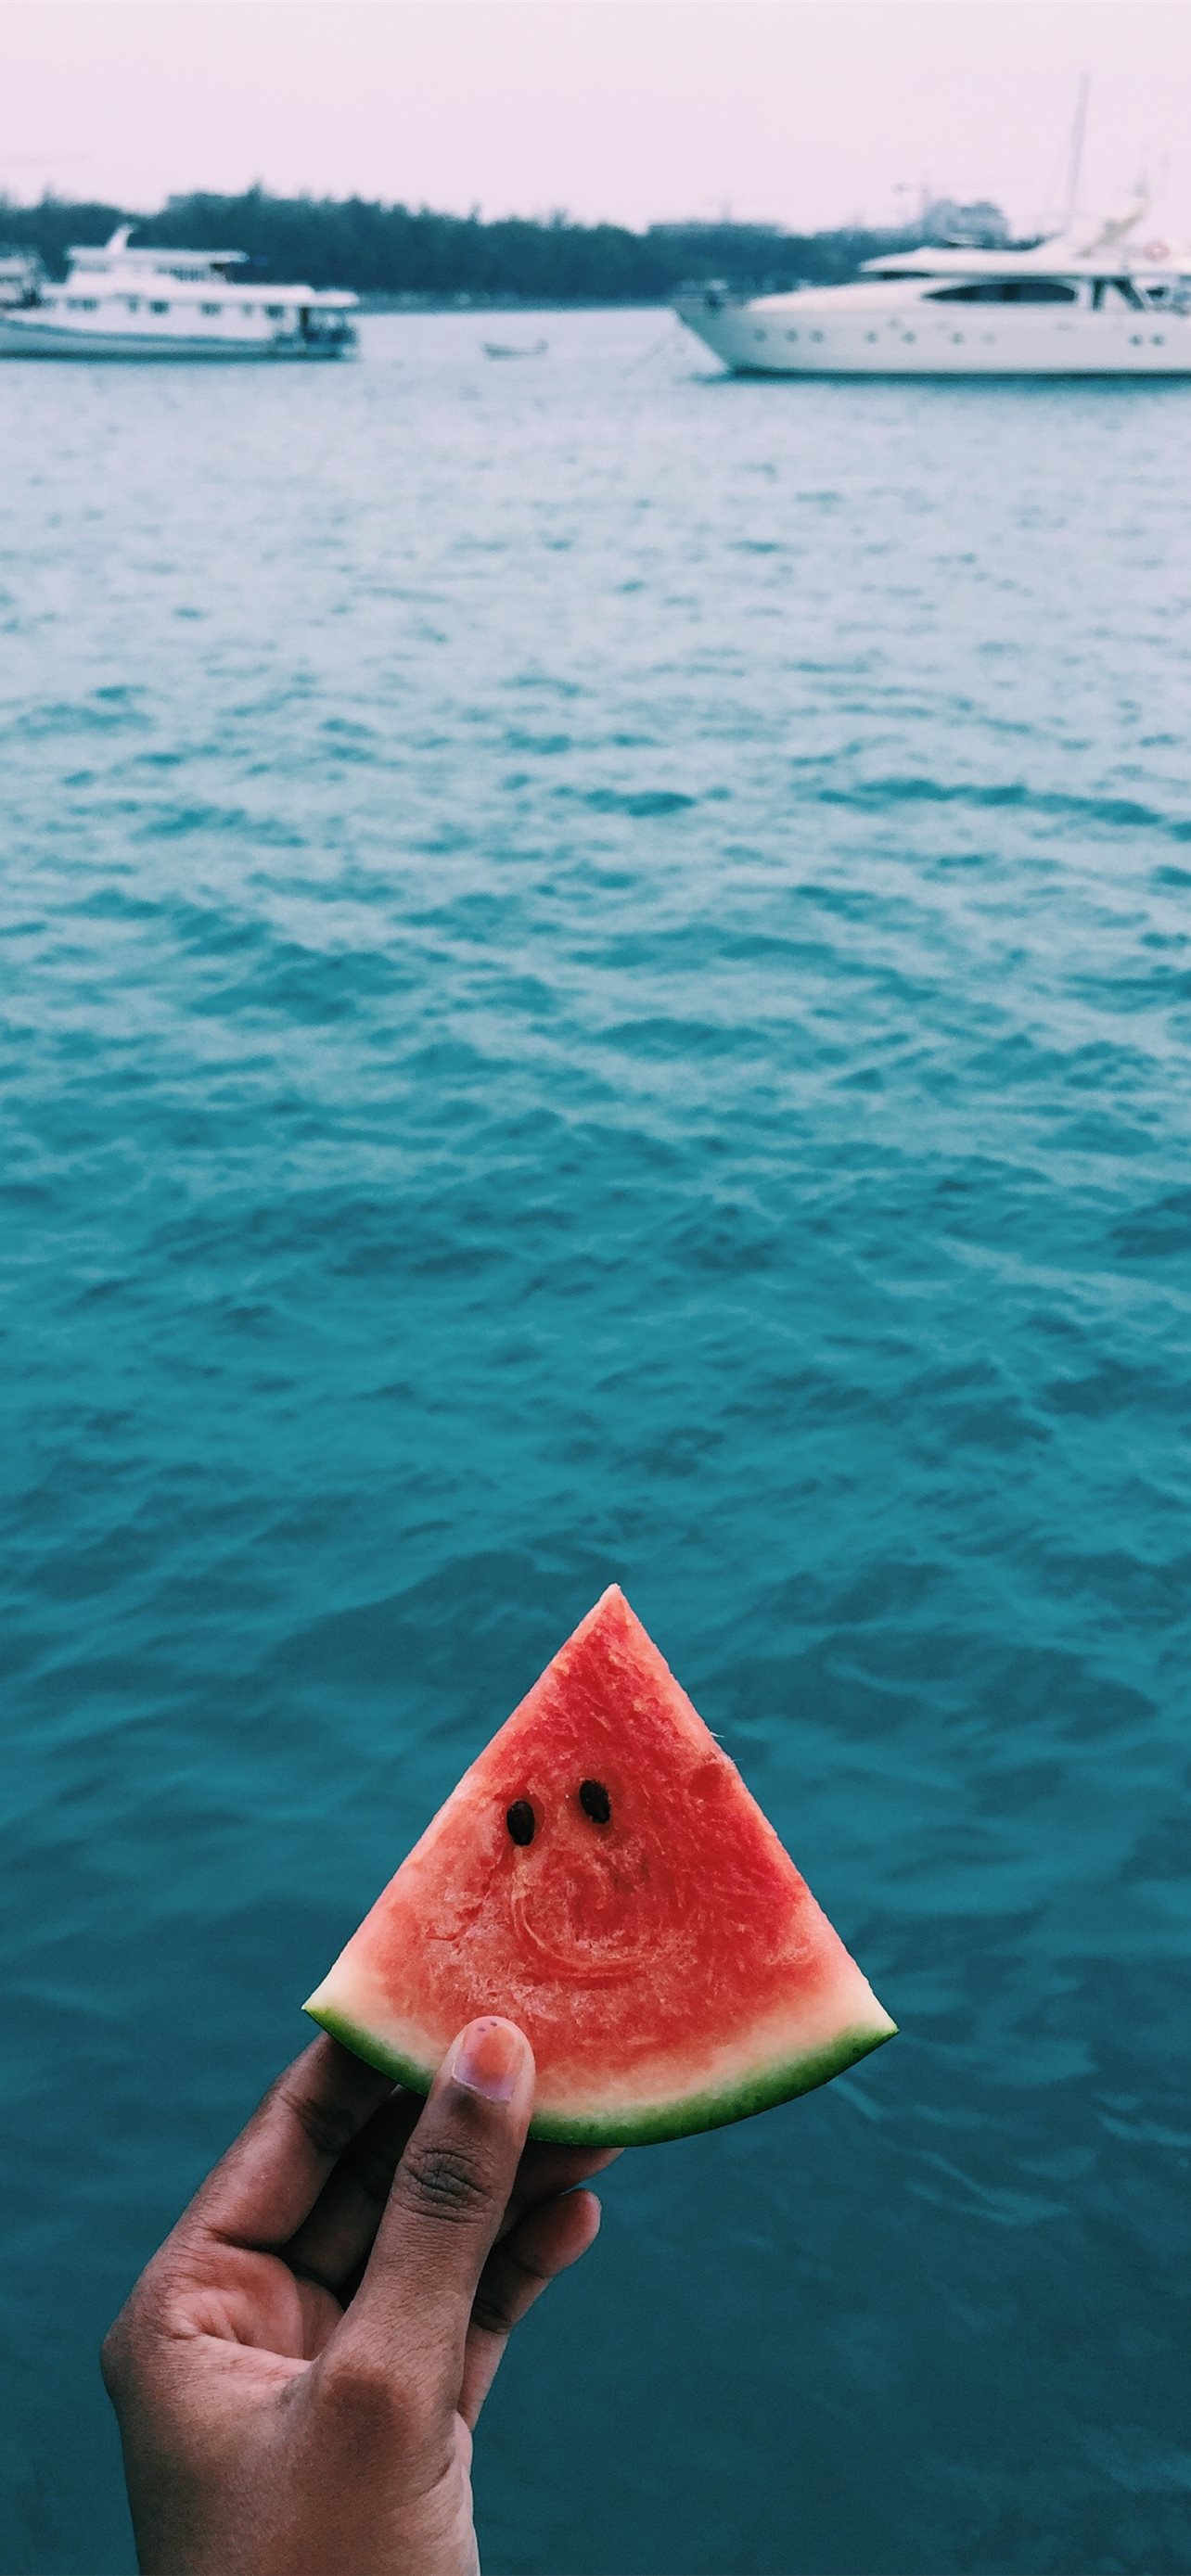 person holding sliced watermelon near body of wate. iPhone Wallpaper Free Download